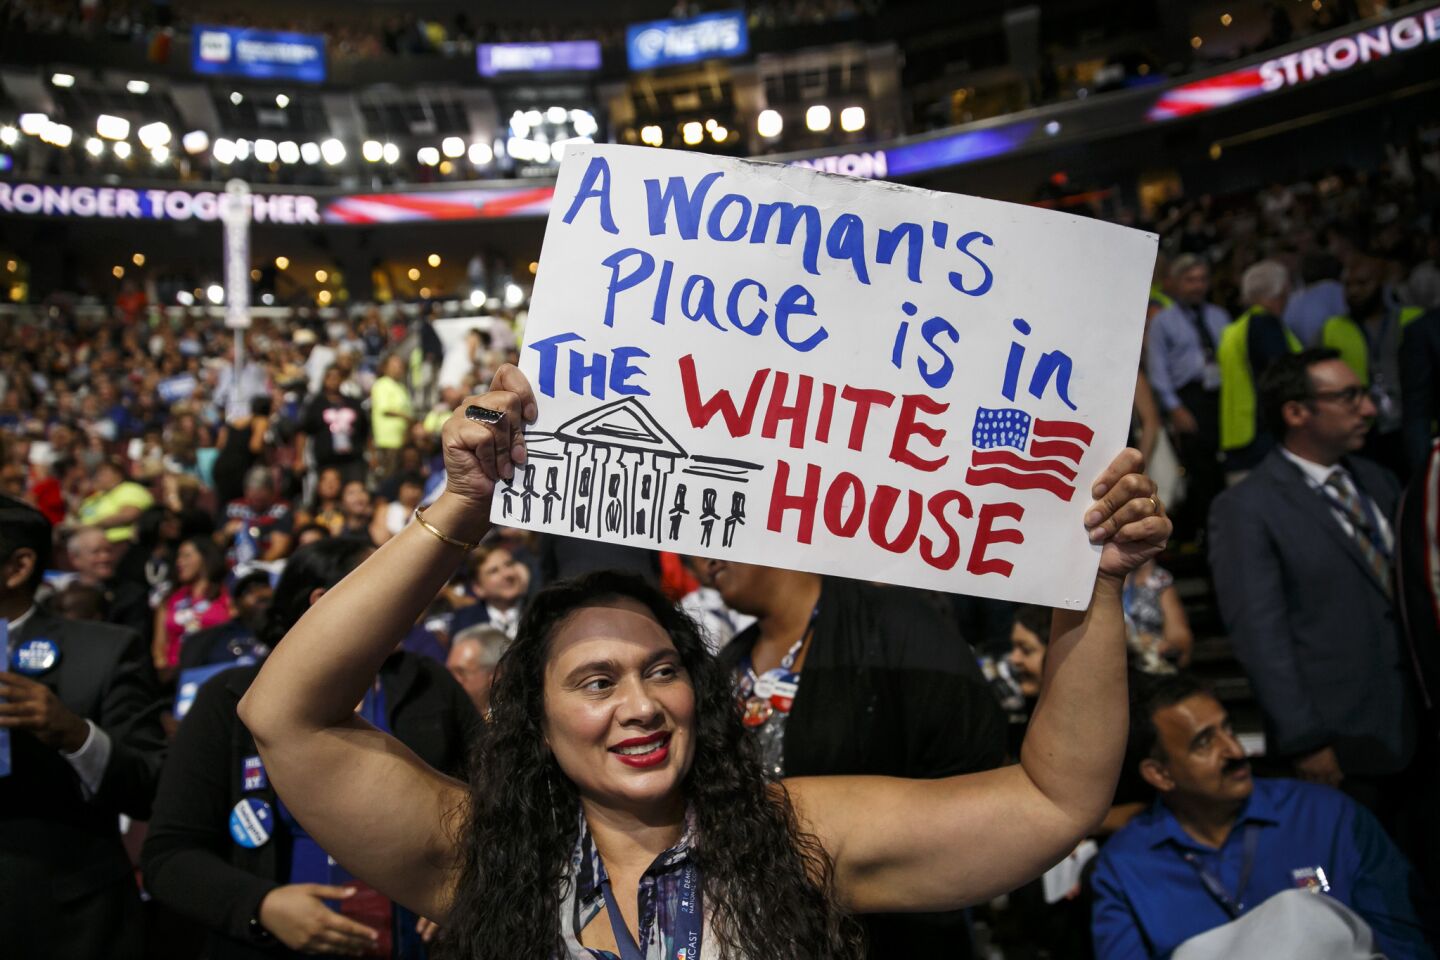 California delegate holds up at sign that reads, "A Woman's Place Is In The White House," at the 2016 Democratic National Convention in Philadelphia.